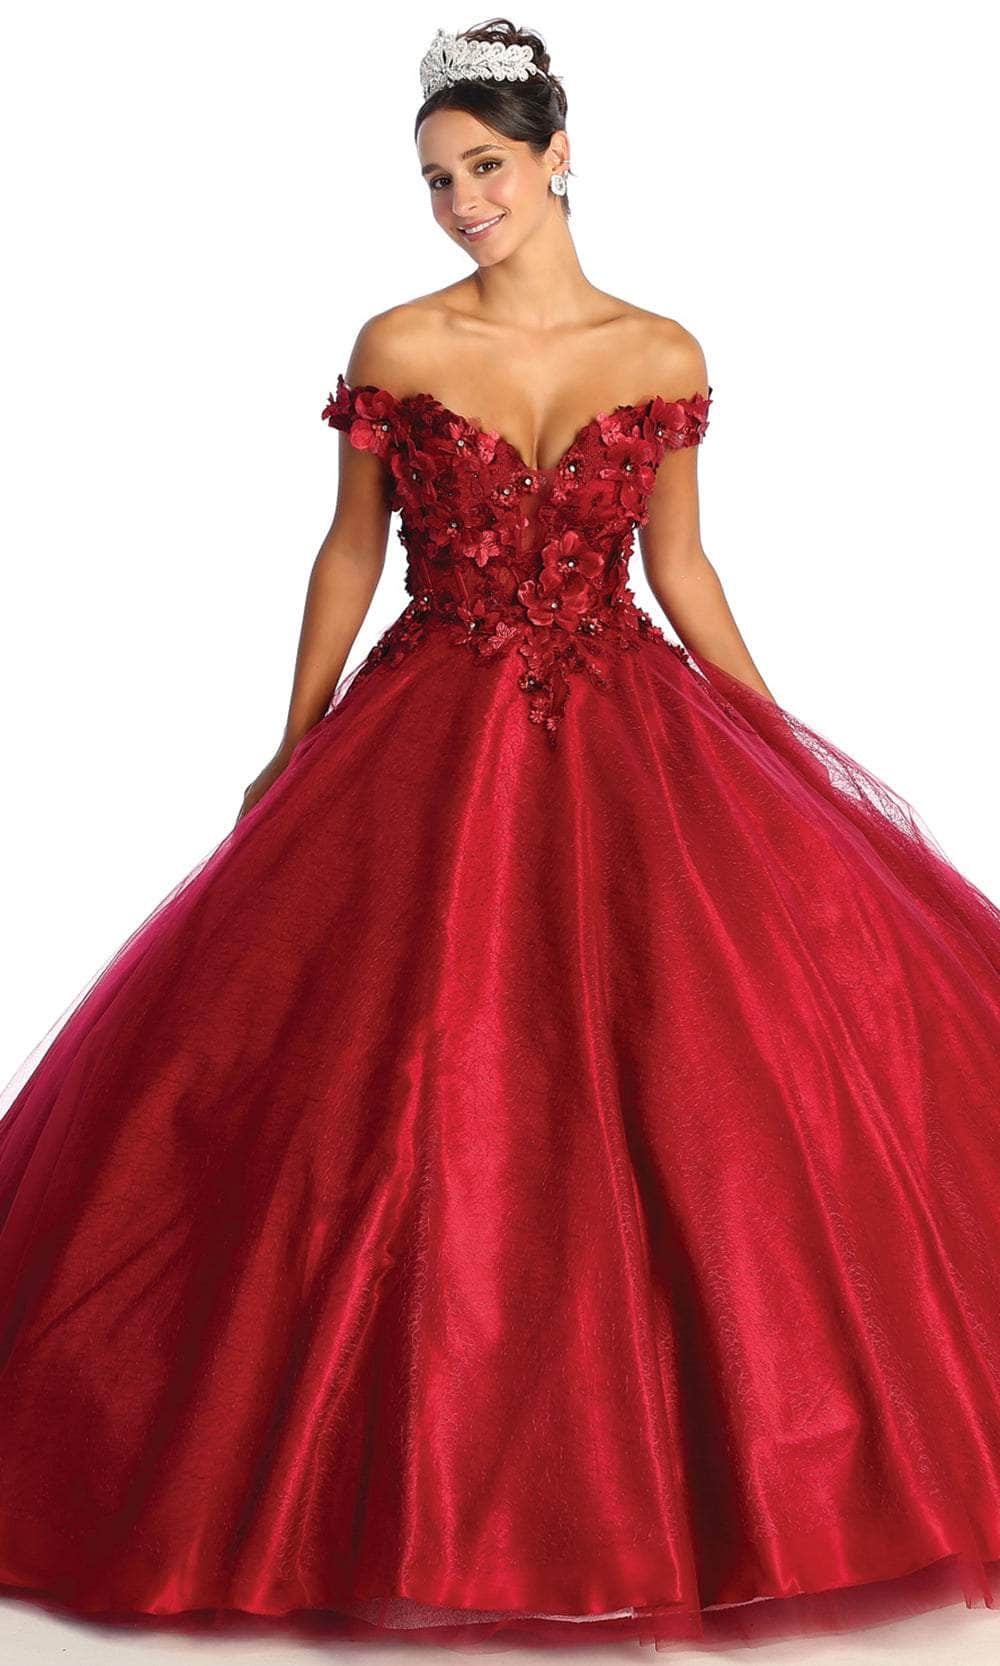 May Queen LK166 - Off Shoulder Applique Prom Ballgown Ball Gowns 2 / Burgundy